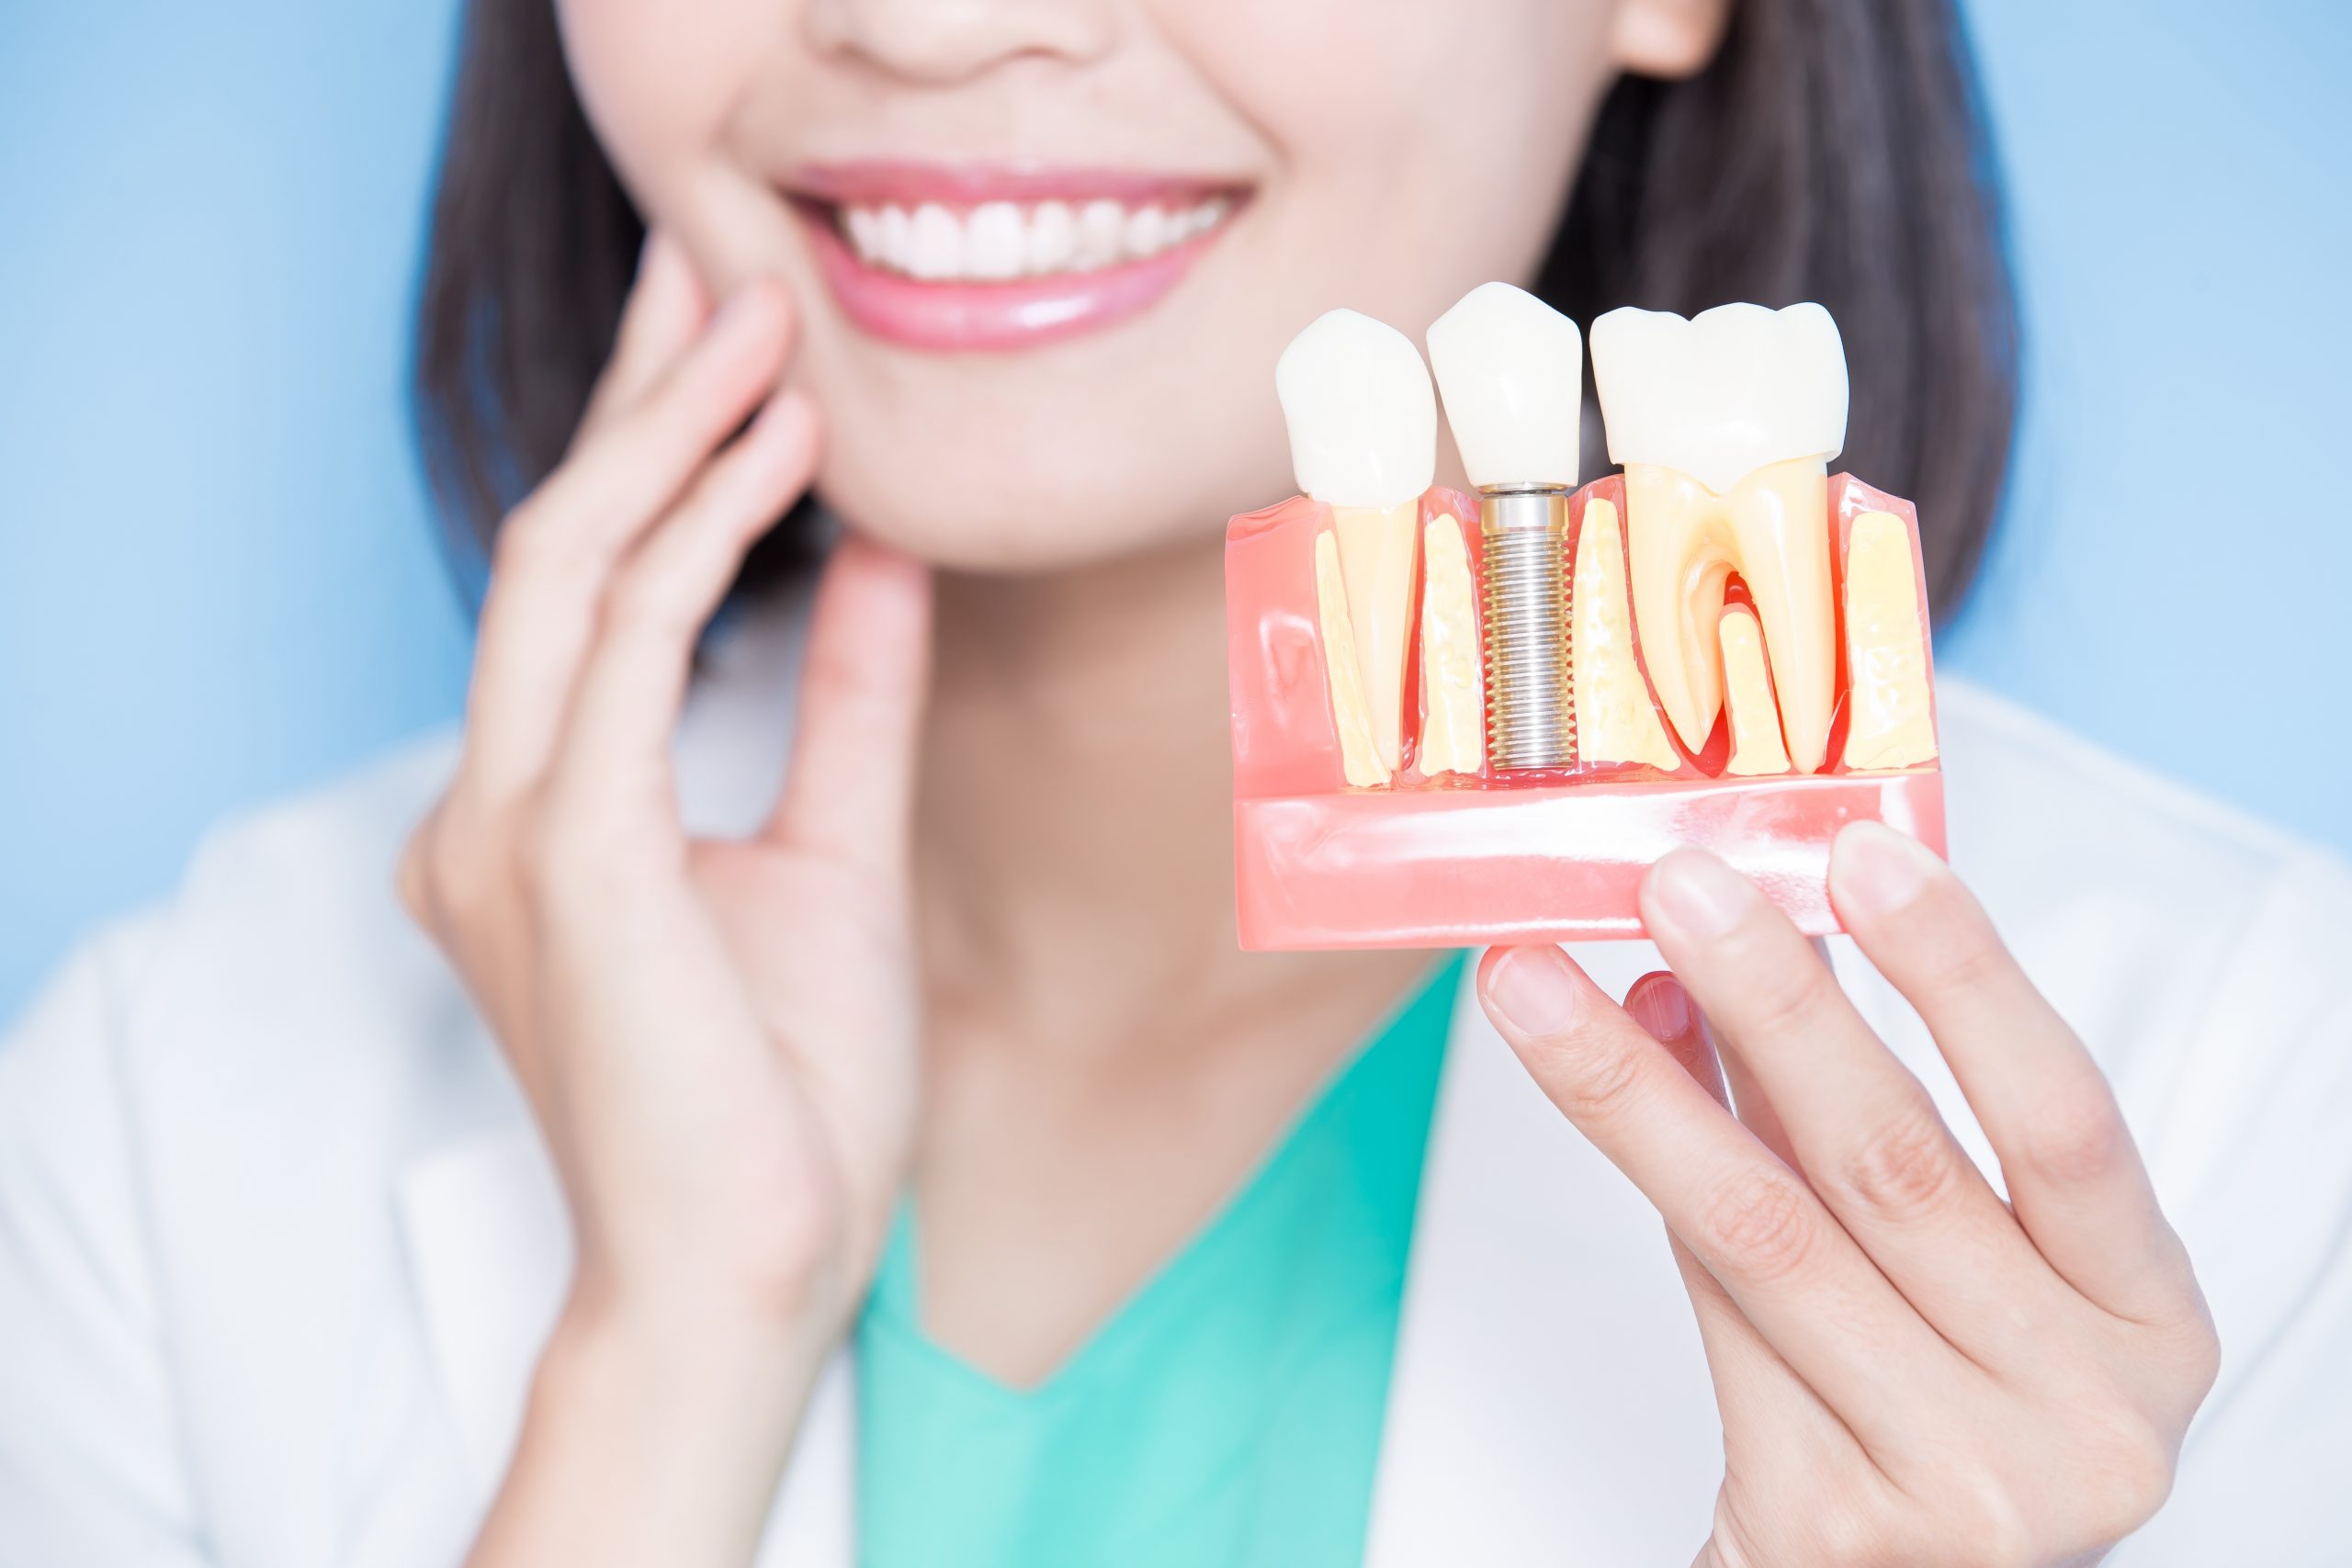 Woman smiling and holding up model of an installed dental implant.